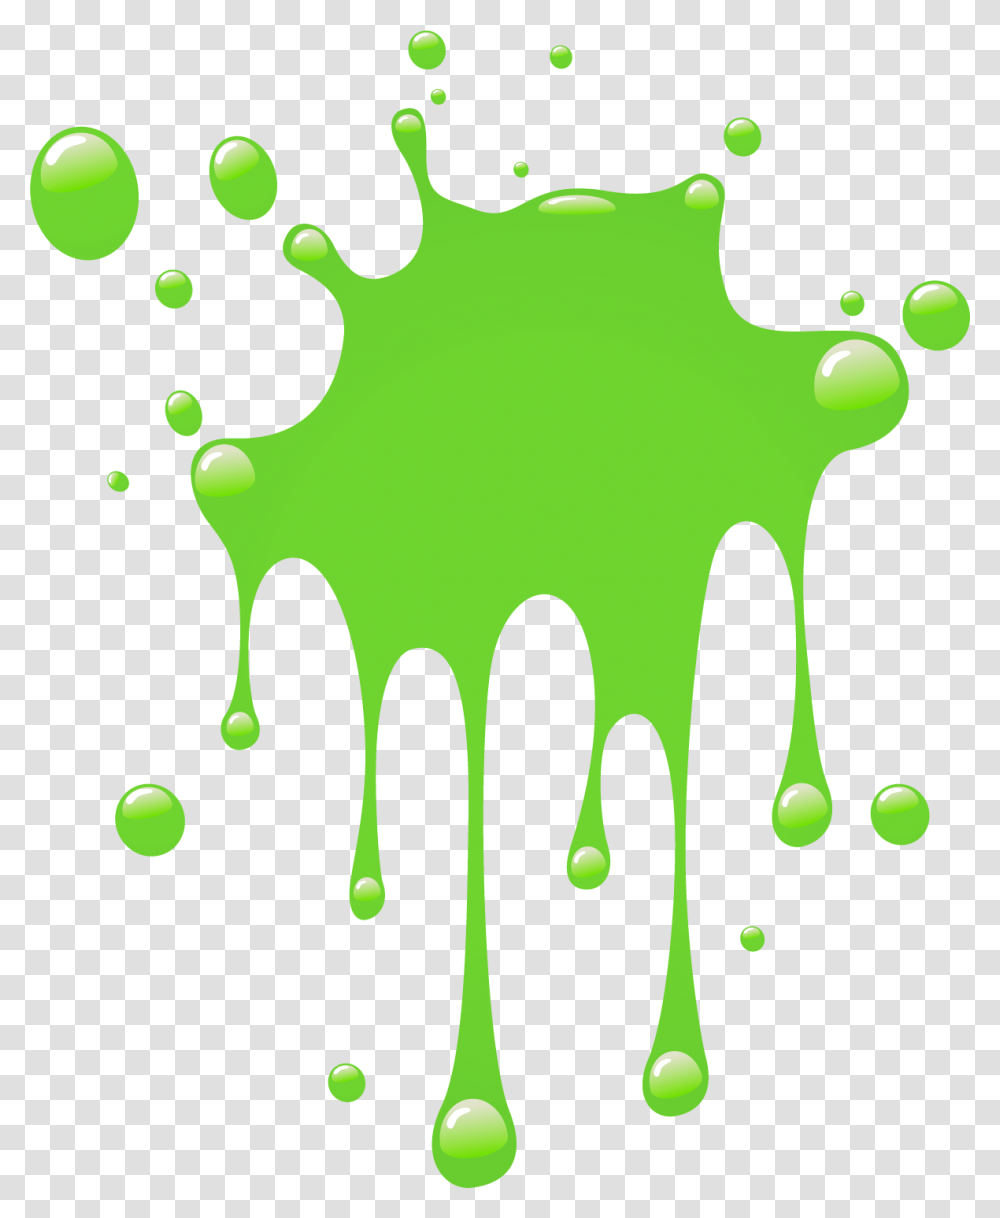 Slime Clipart Drip Slime Clipart, Leaf, Plant, Green, Game Transparent Png